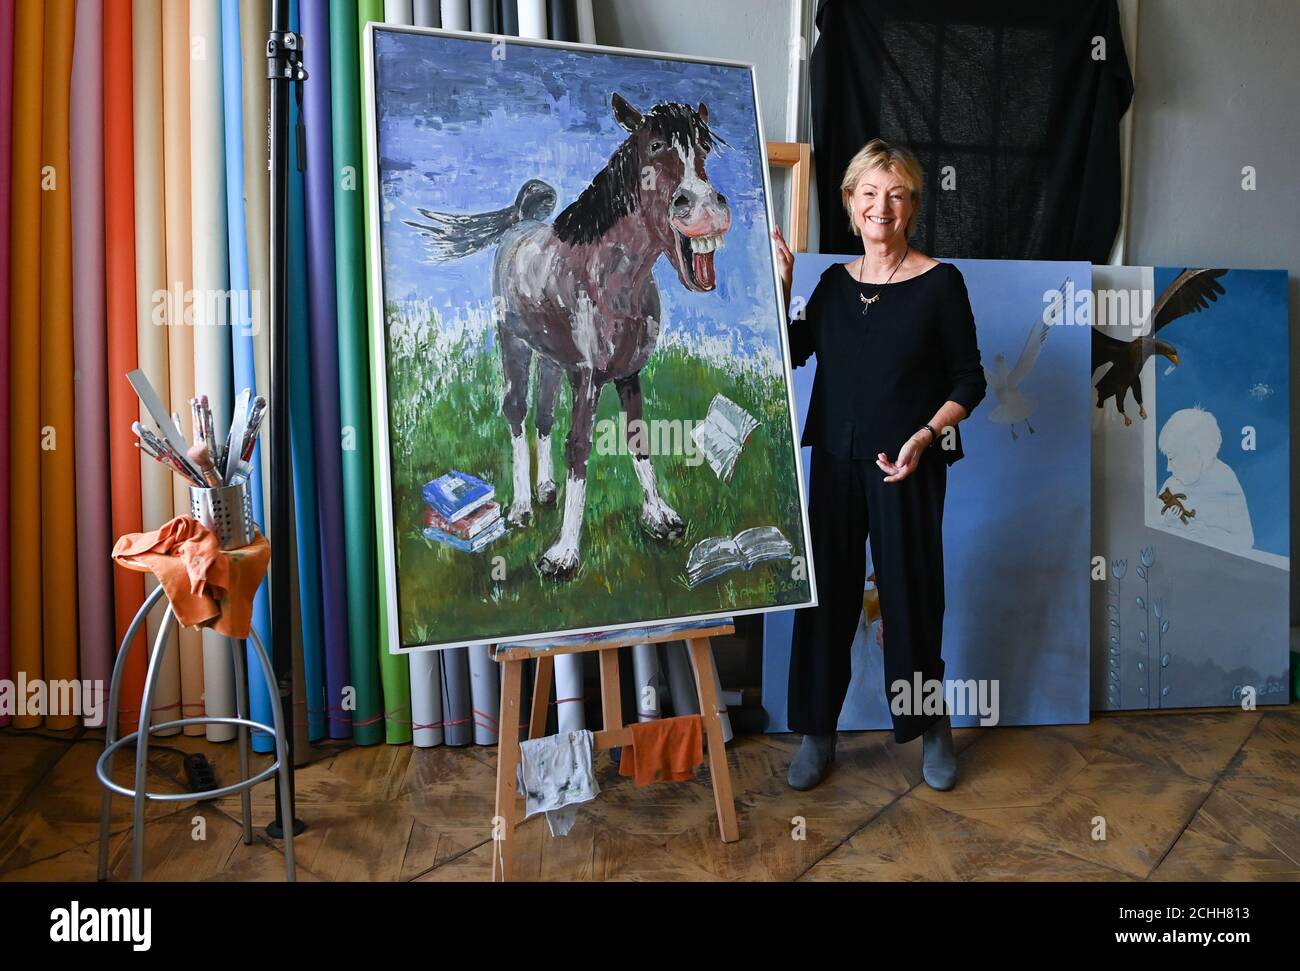 11 September 2020, Berlin: The painter Anne Dohrenkamp, wife of Jürgen von der Lippe, at a photo session. Her works will be shown in the exhibition AENO Painting and Photography in the Galerie Hotel Mond Fine Arts from 24.09.2020 to 25.10.2020 together with photos by the Berlin photographer Andre Kowalski. Anne Dohrenkamp's pictures reflect the individual stages of her artistic development, which has been particularly intense in recent years. In her versatility, she shows detailed, elaborate l pictures in layer technique, spontaneous watercolours, collages, caricature-like, overdrawn animal mo Stock Photo